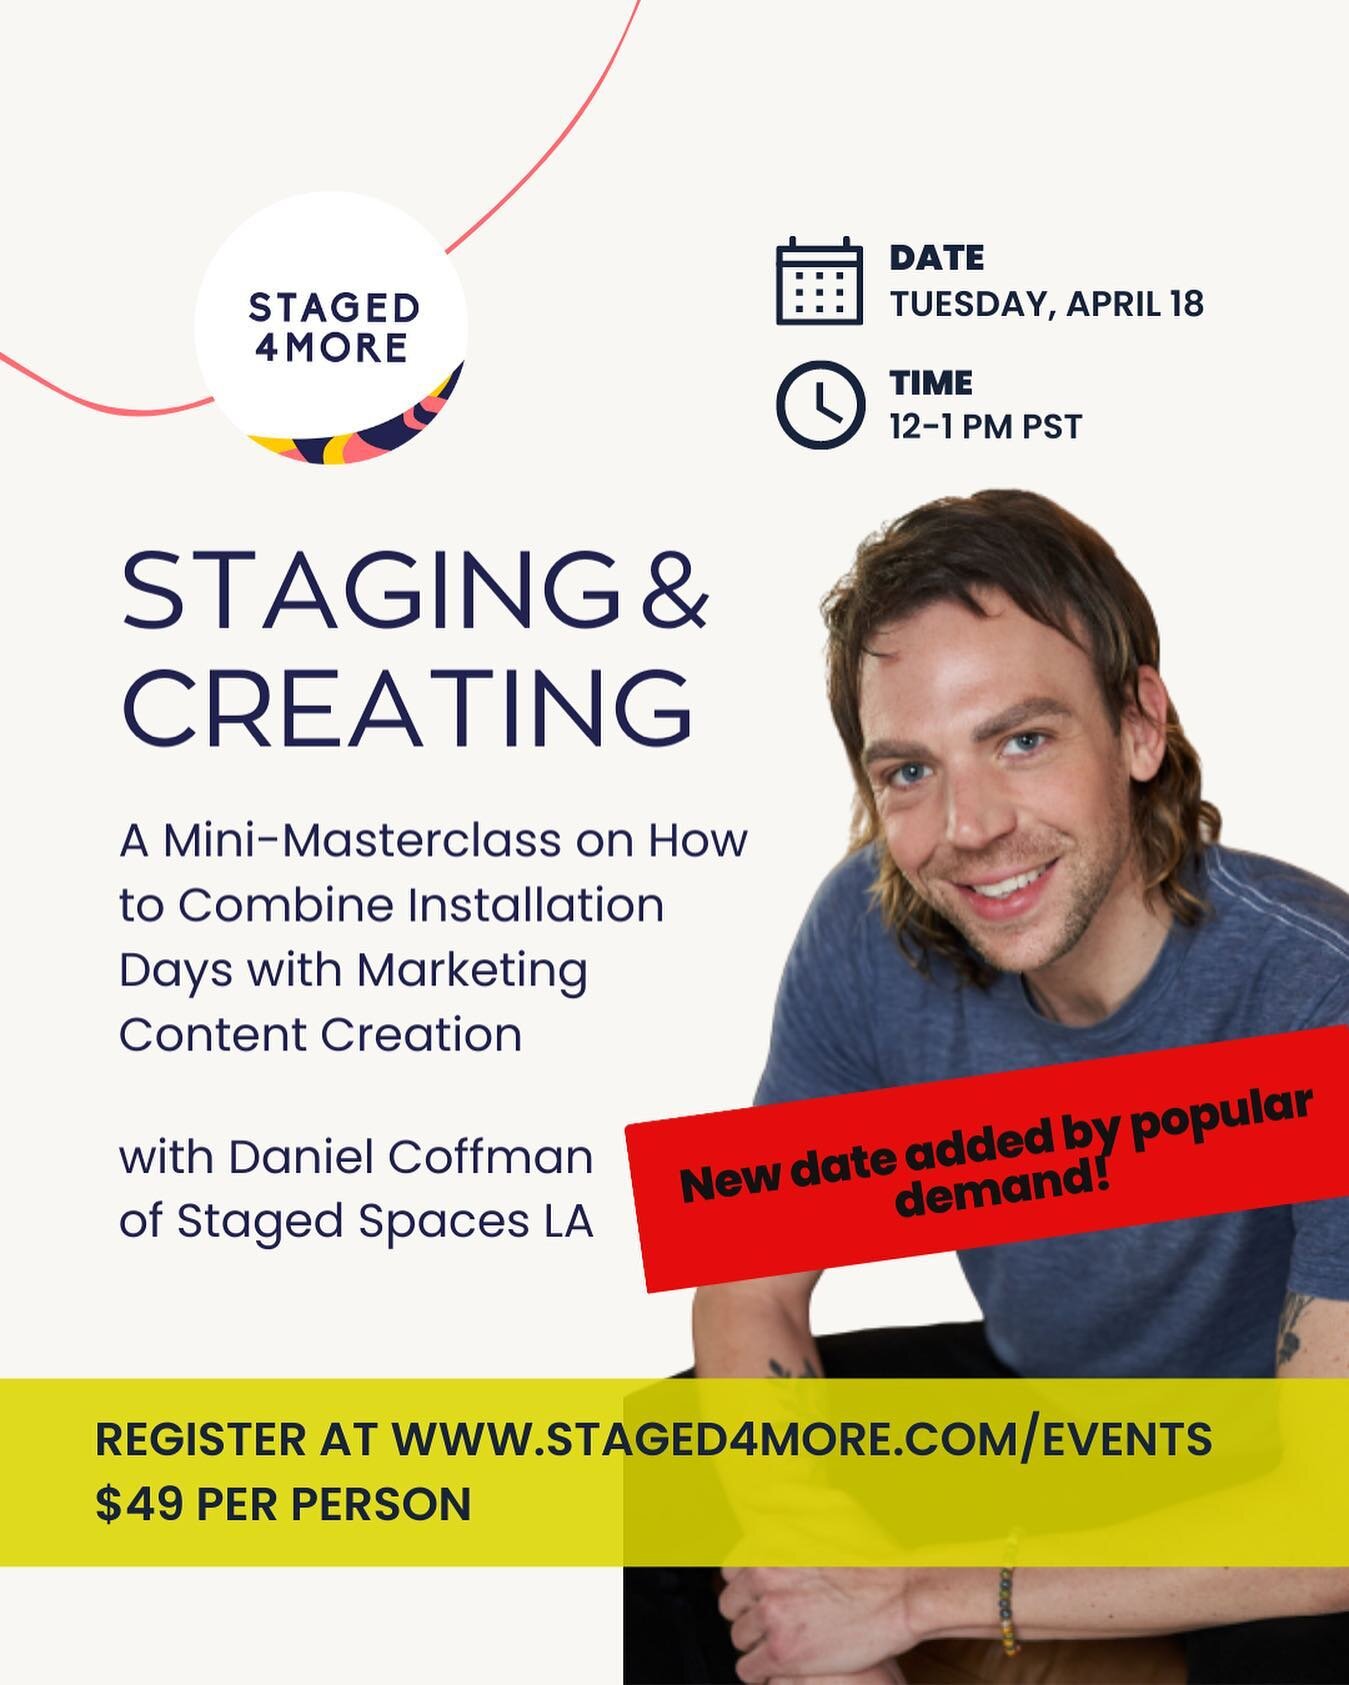  NEW DATE ADDED DUE TO POPULAR DEMAND! Don&rsquo;t miss it this time &zwj;♀️

Join @stagedspaces for his new, live mini masterclass Staging &amp; Creating on April 18th where he'll share his insider tips on combining staging days with marketing